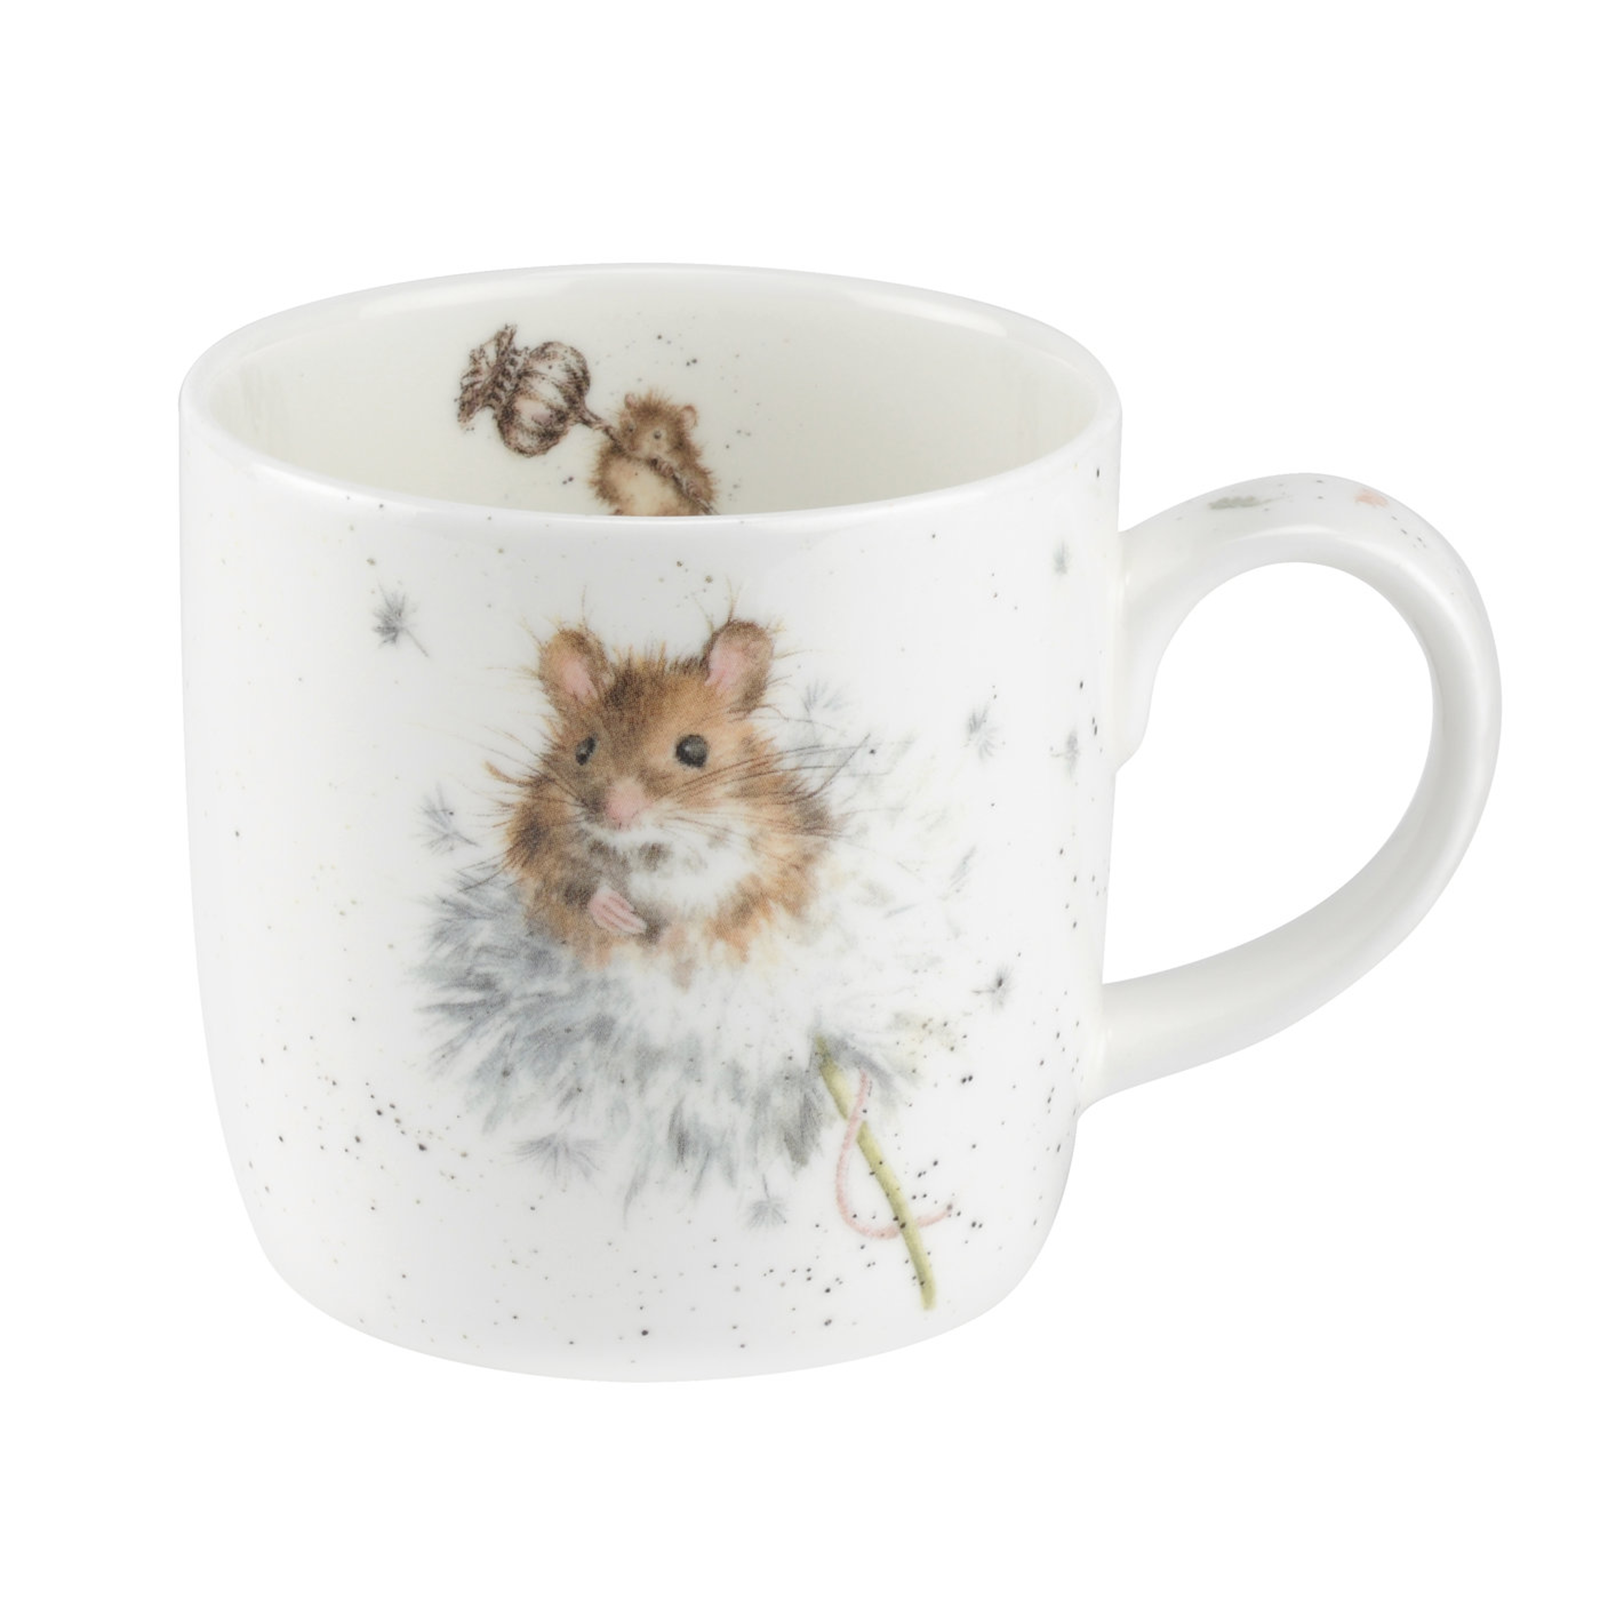 Royal Worcester Wrendale Designs Becher Country Mice / Maus 0,31ltr.